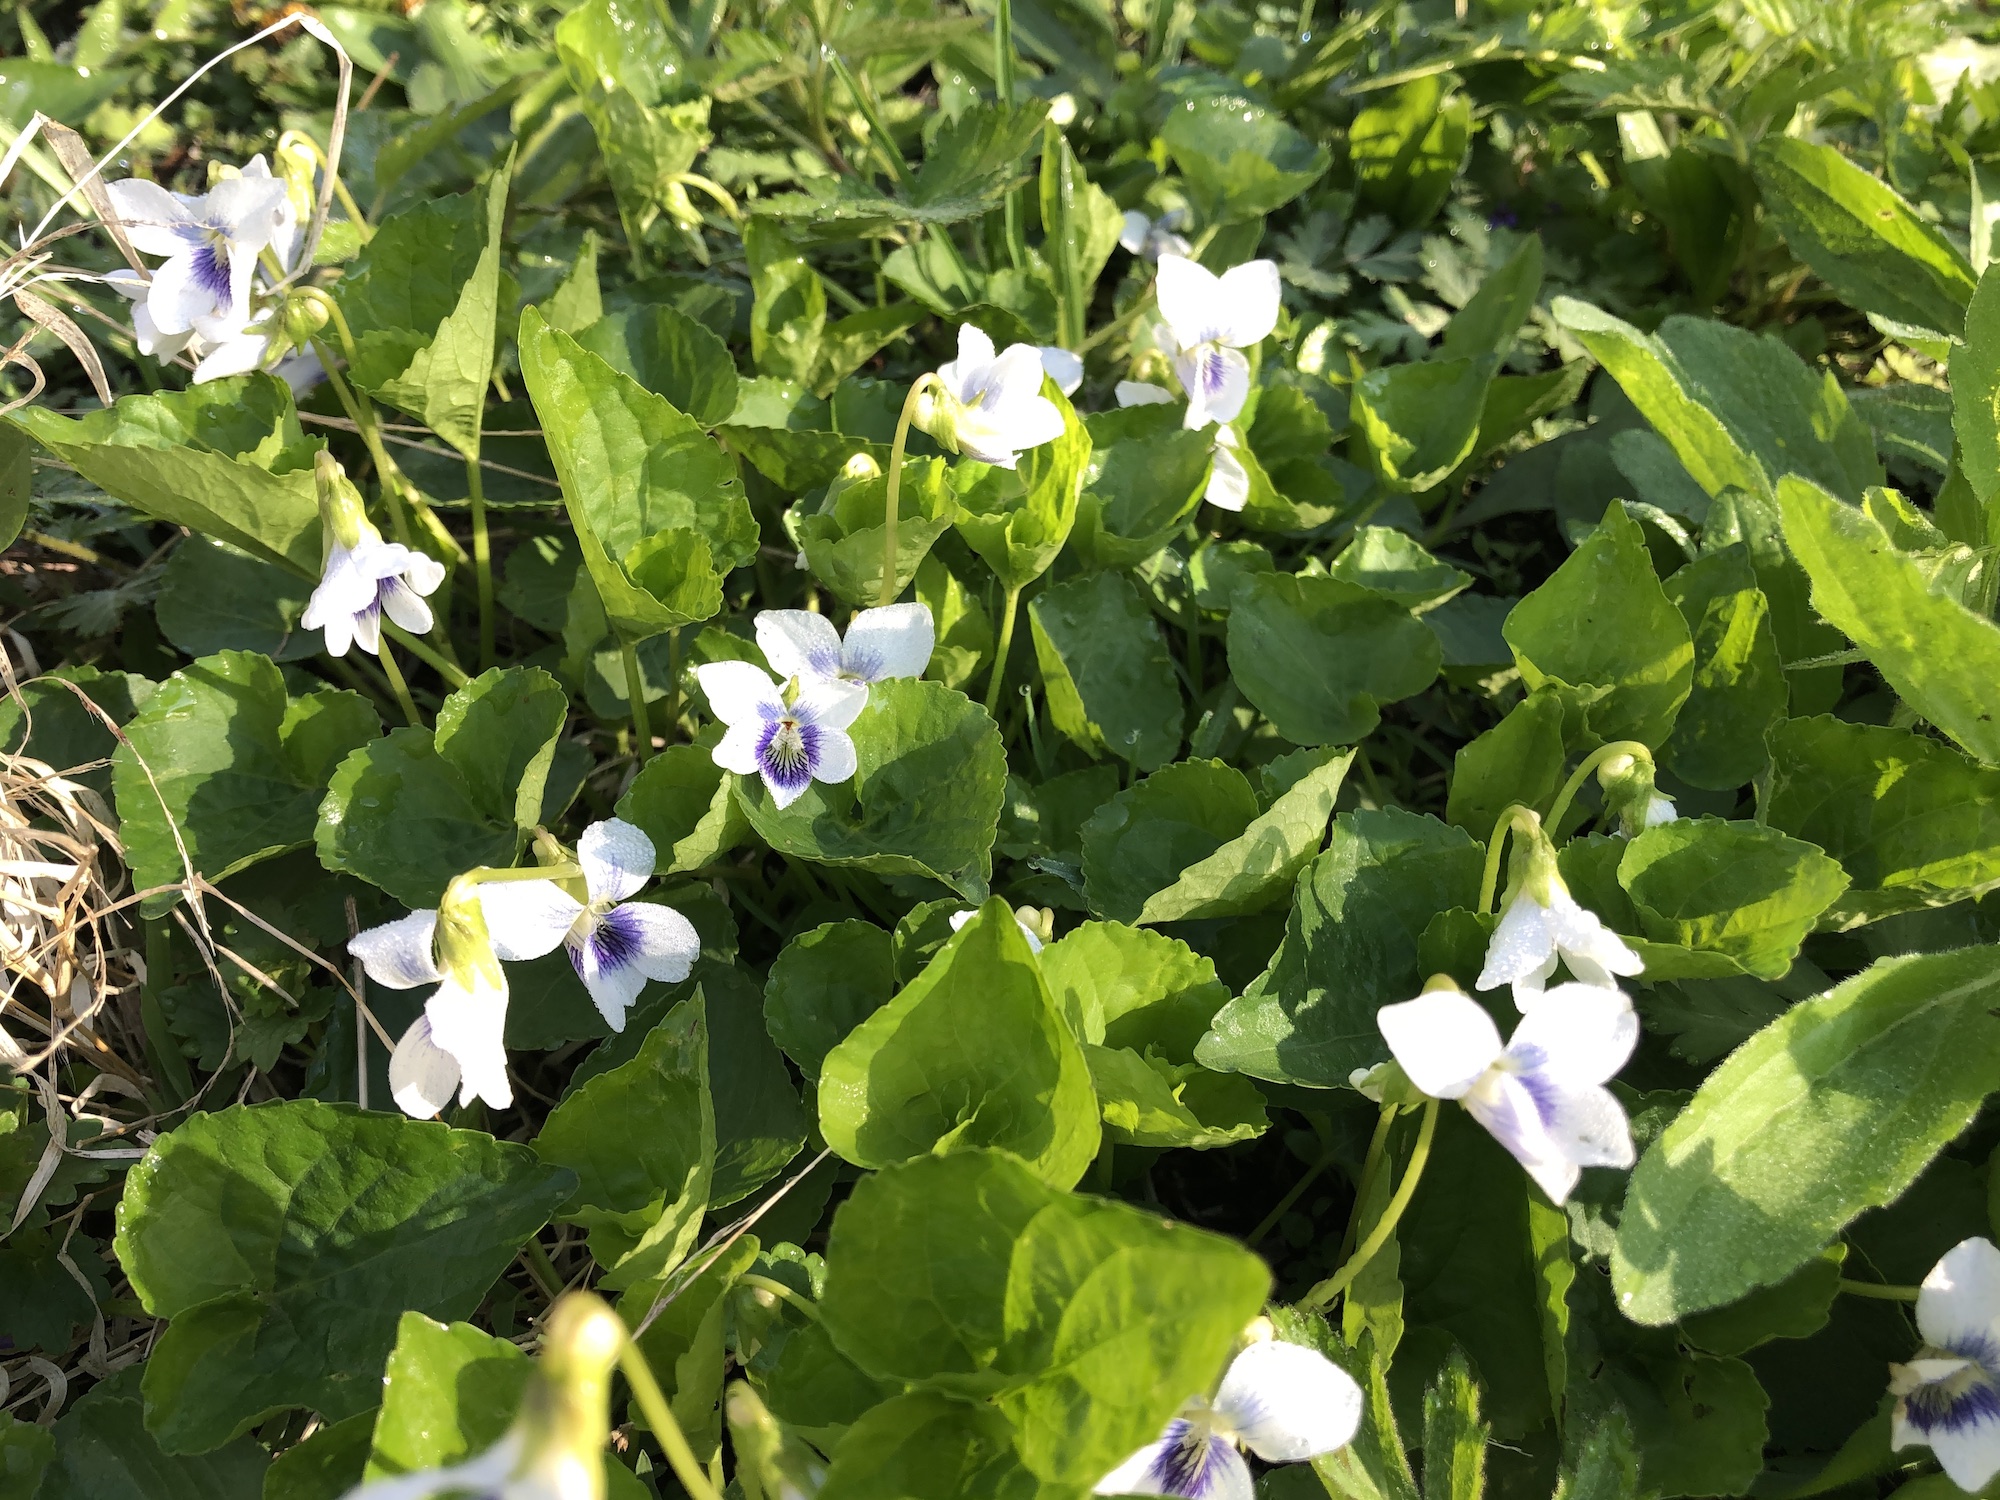 Wood Violets near the Duck Pond on May 4, 2019.